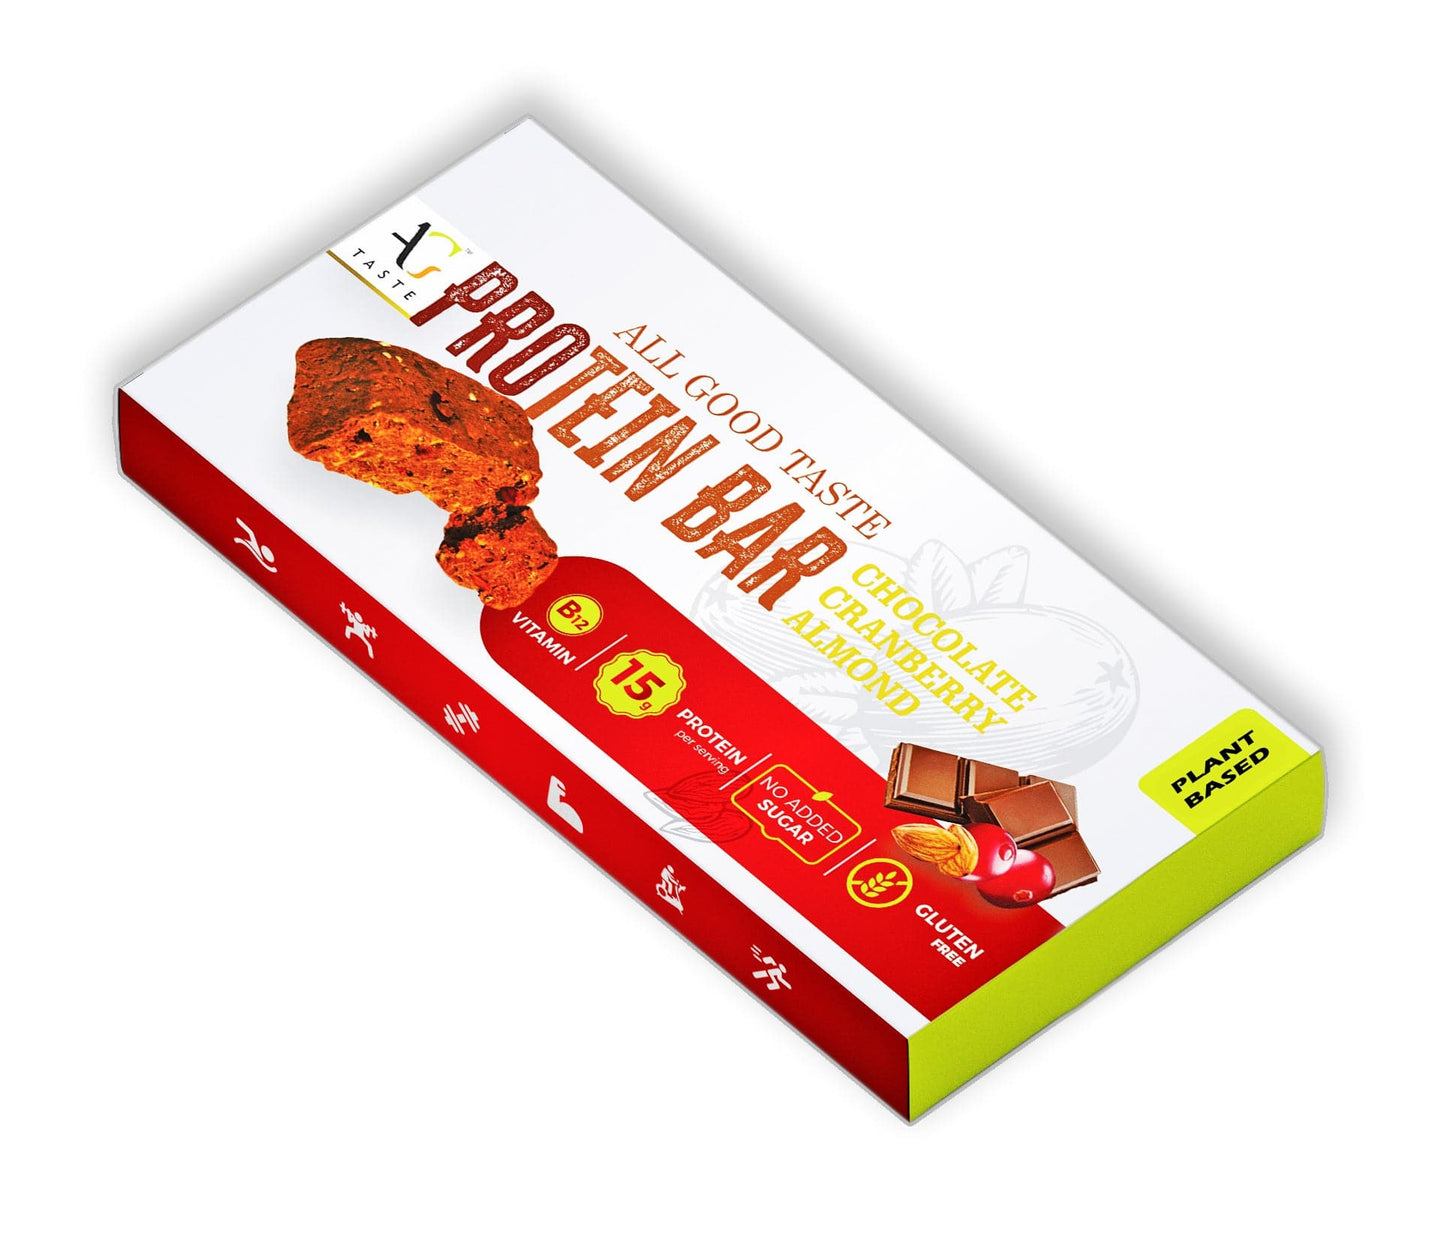 AG Taste Chocolate Cranberry Almond Protein Bar - 270 g, Pack of 6